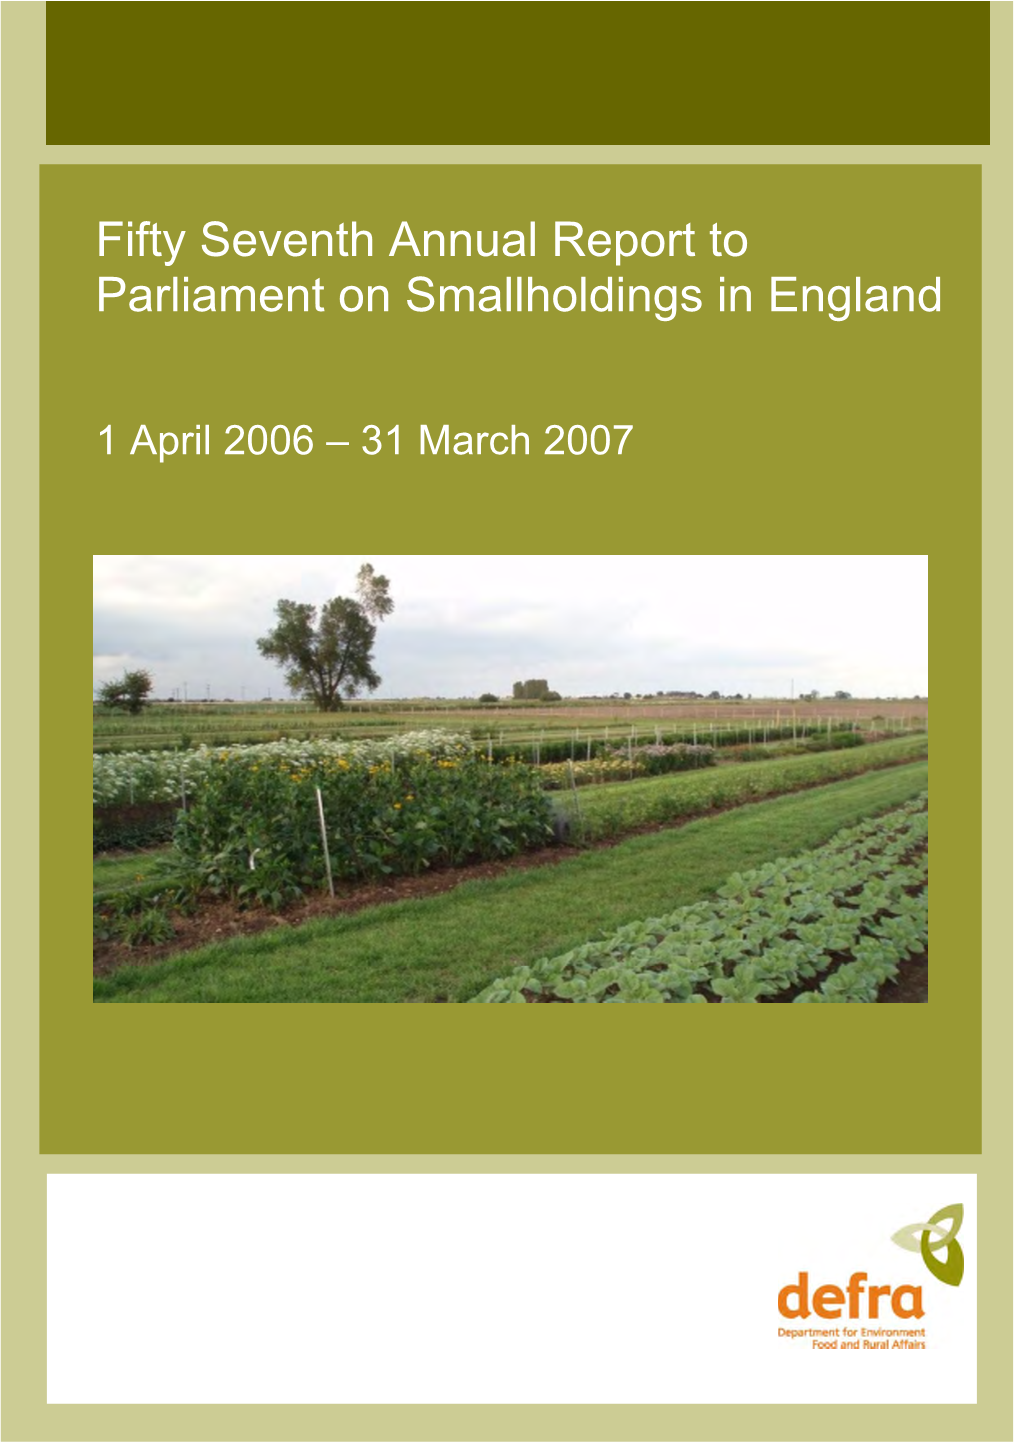 Fifty Seventh Annual Report to Parliament on Smallholdings in England